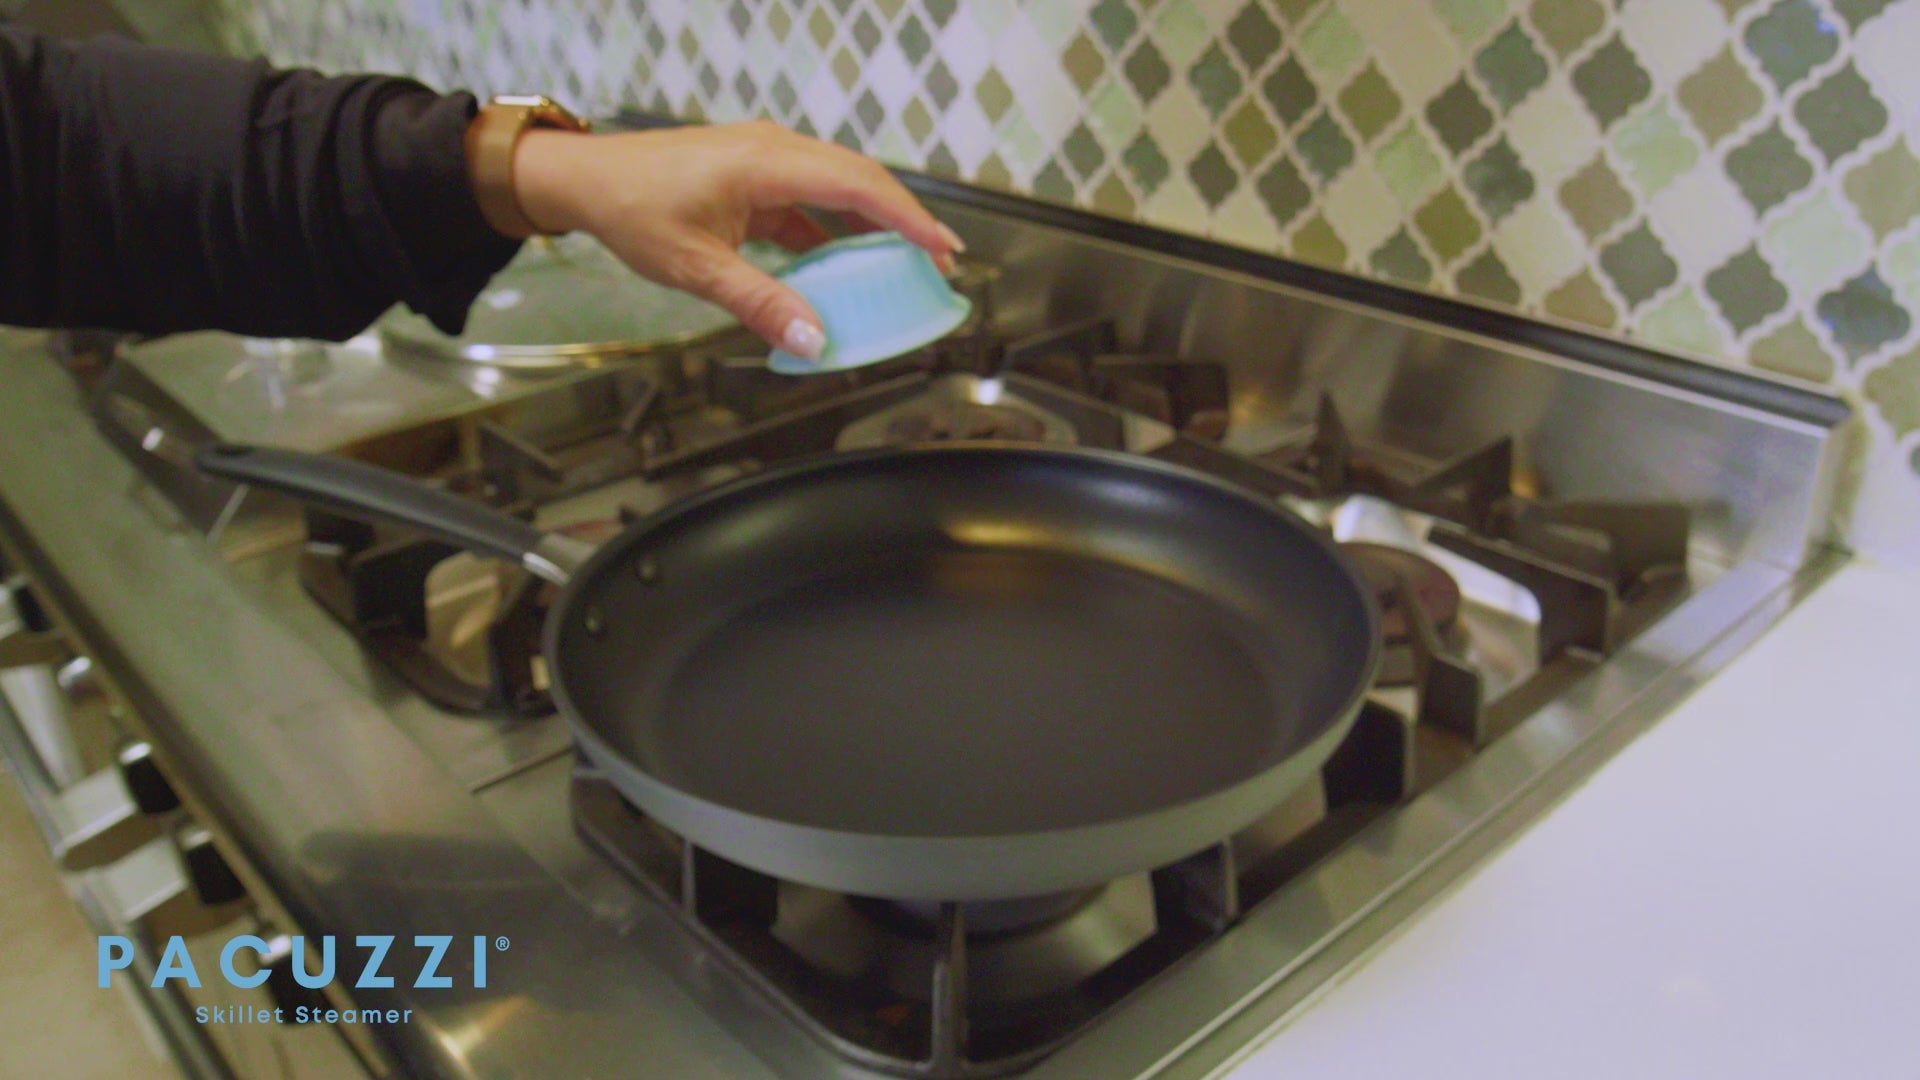 How to Pacuzzi Skillet Steamer Reheat Meals in Minutes with Pacuzzi Mat Video 